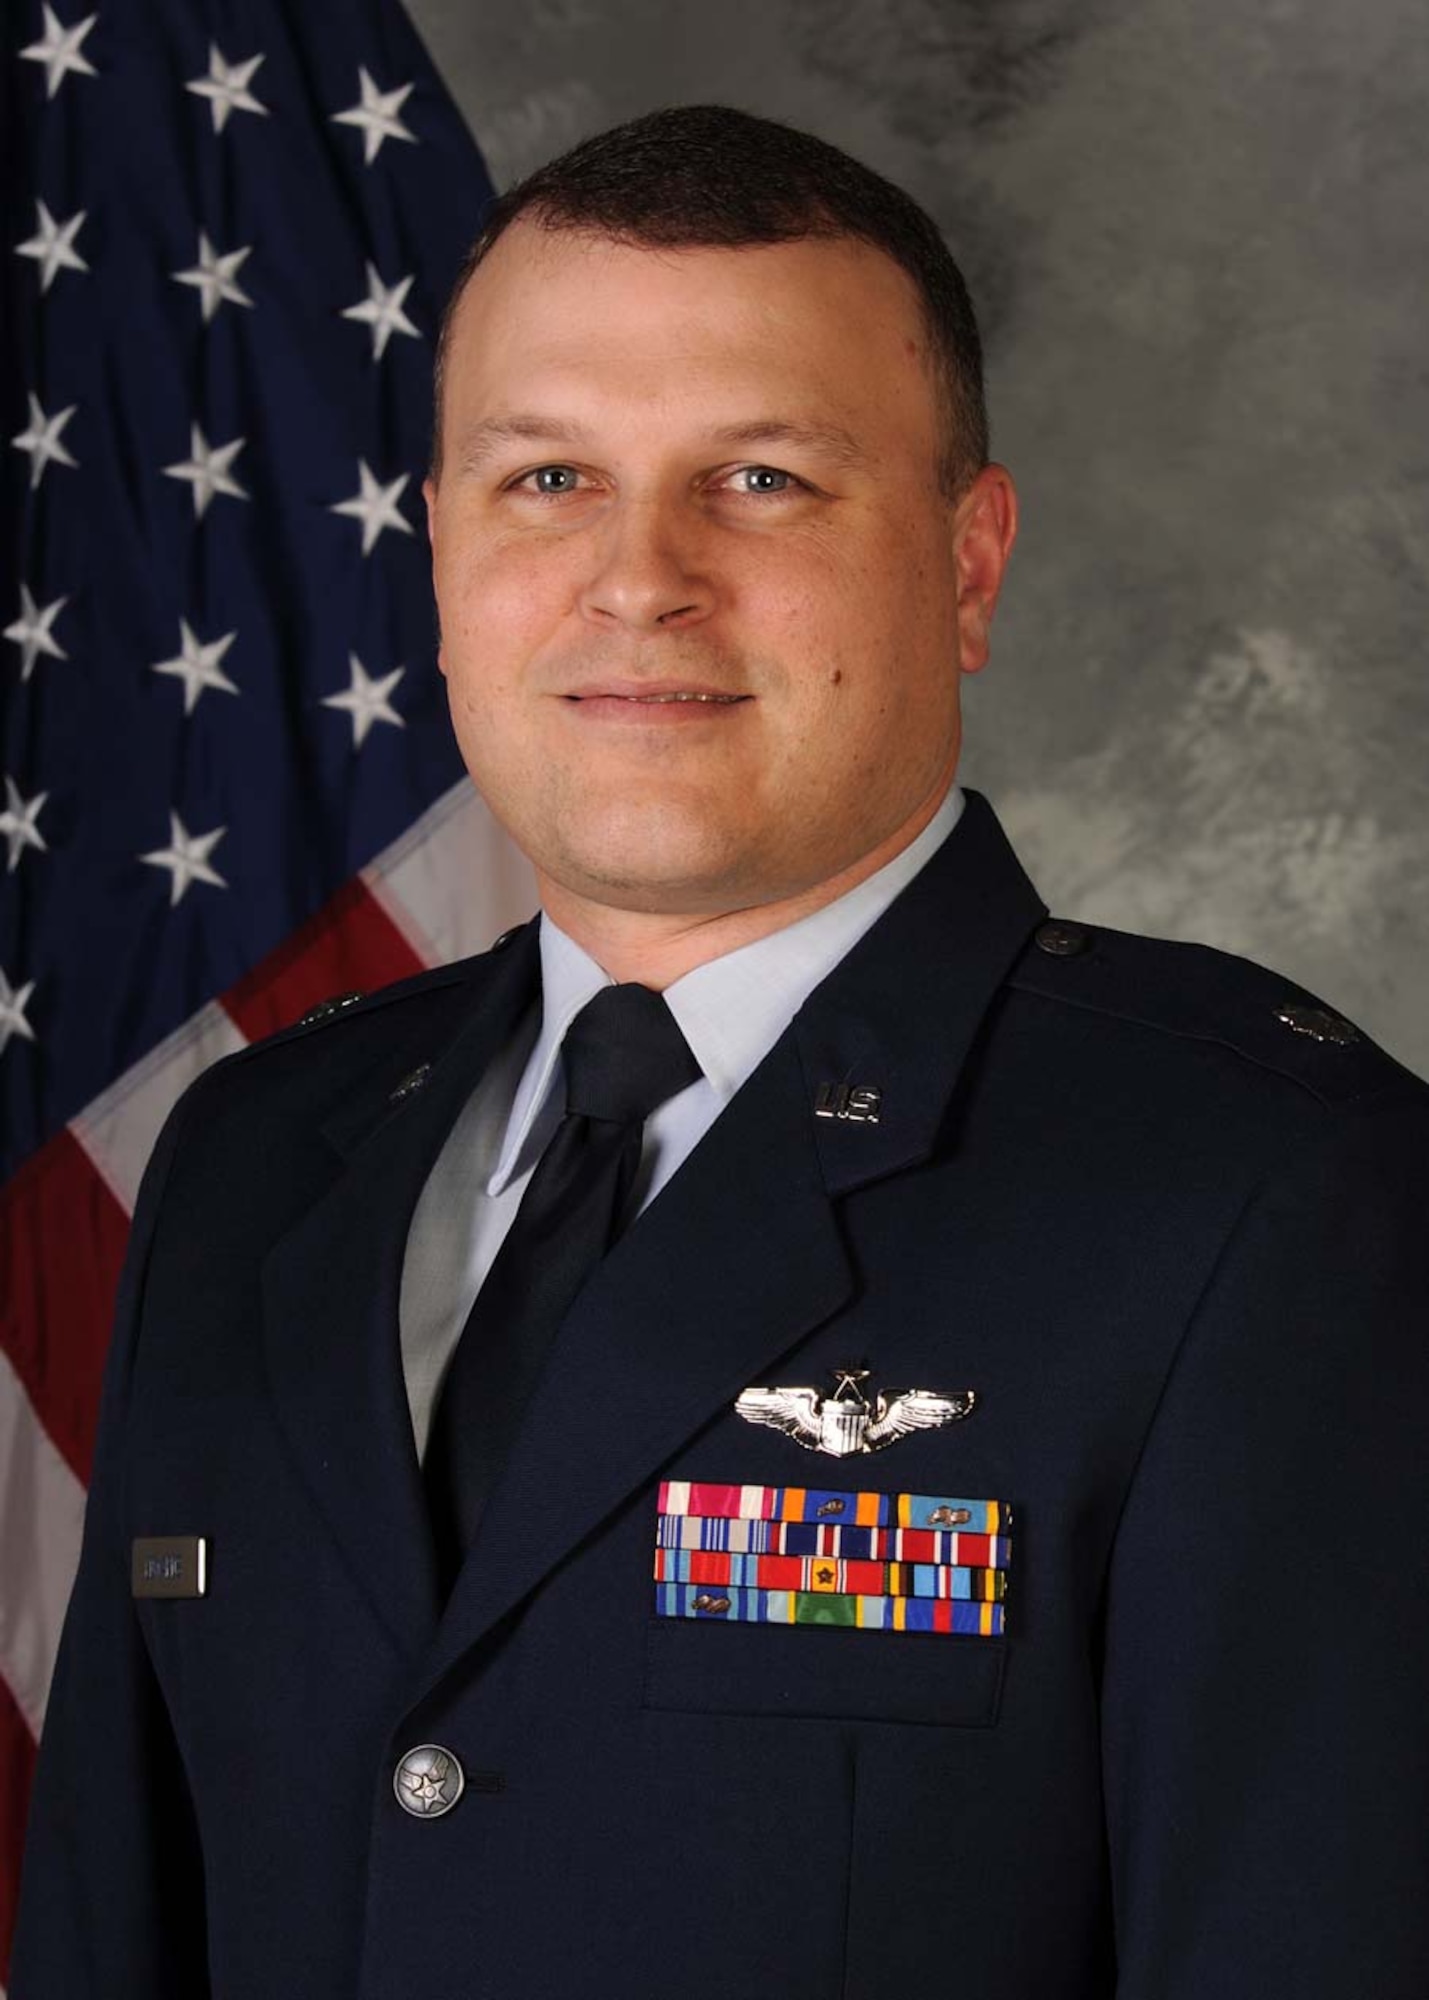 Lt. Col. Alan Edwards from the Air Force Operational Test and Evaluation Center's Detachment 6 at Nellis AFB, Nev., is the 2009 National Defense Industrial Association Military Tester of the Year for AFOTEC.